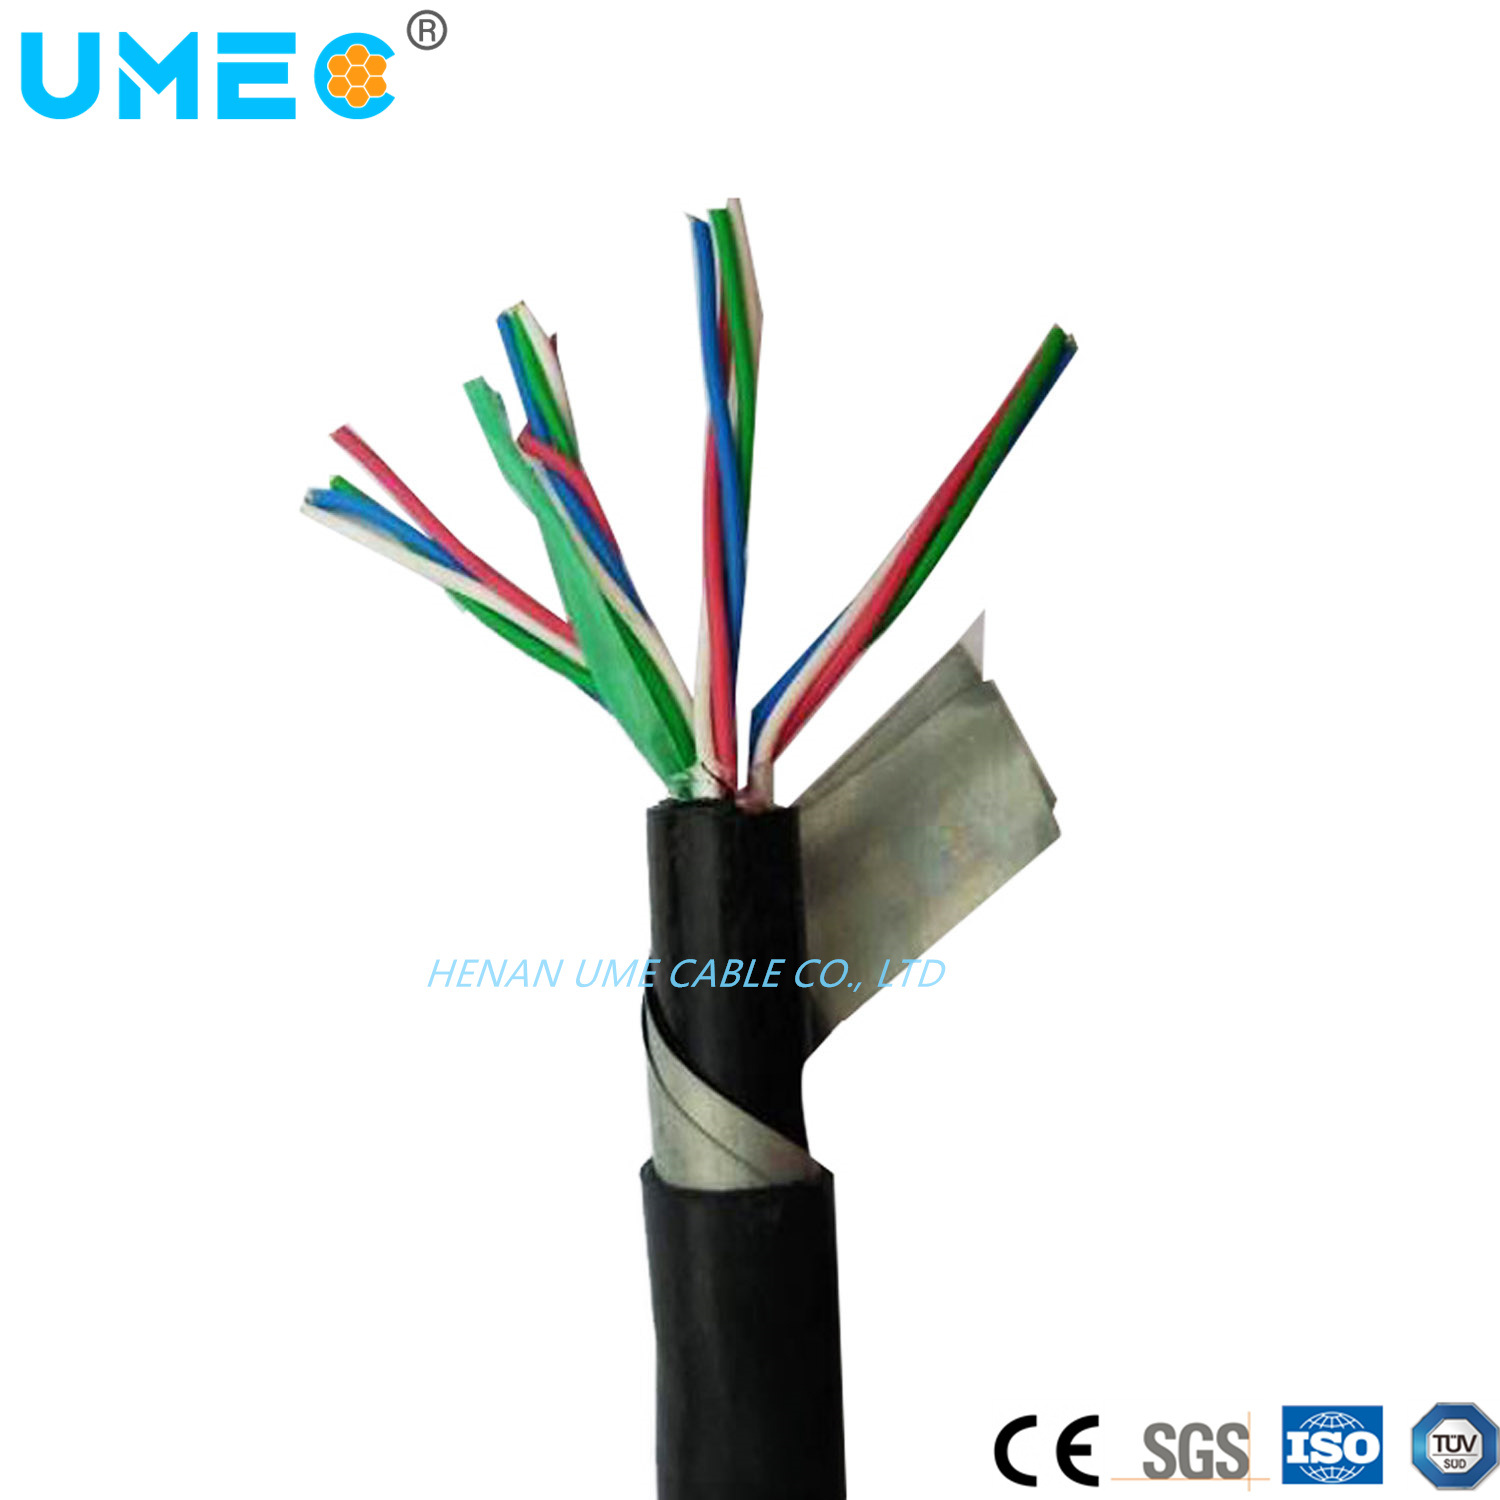 Transmission of Audio Signals and Fixed Laying of Railway Control Cables 37X1.0mm 56X1.0mm